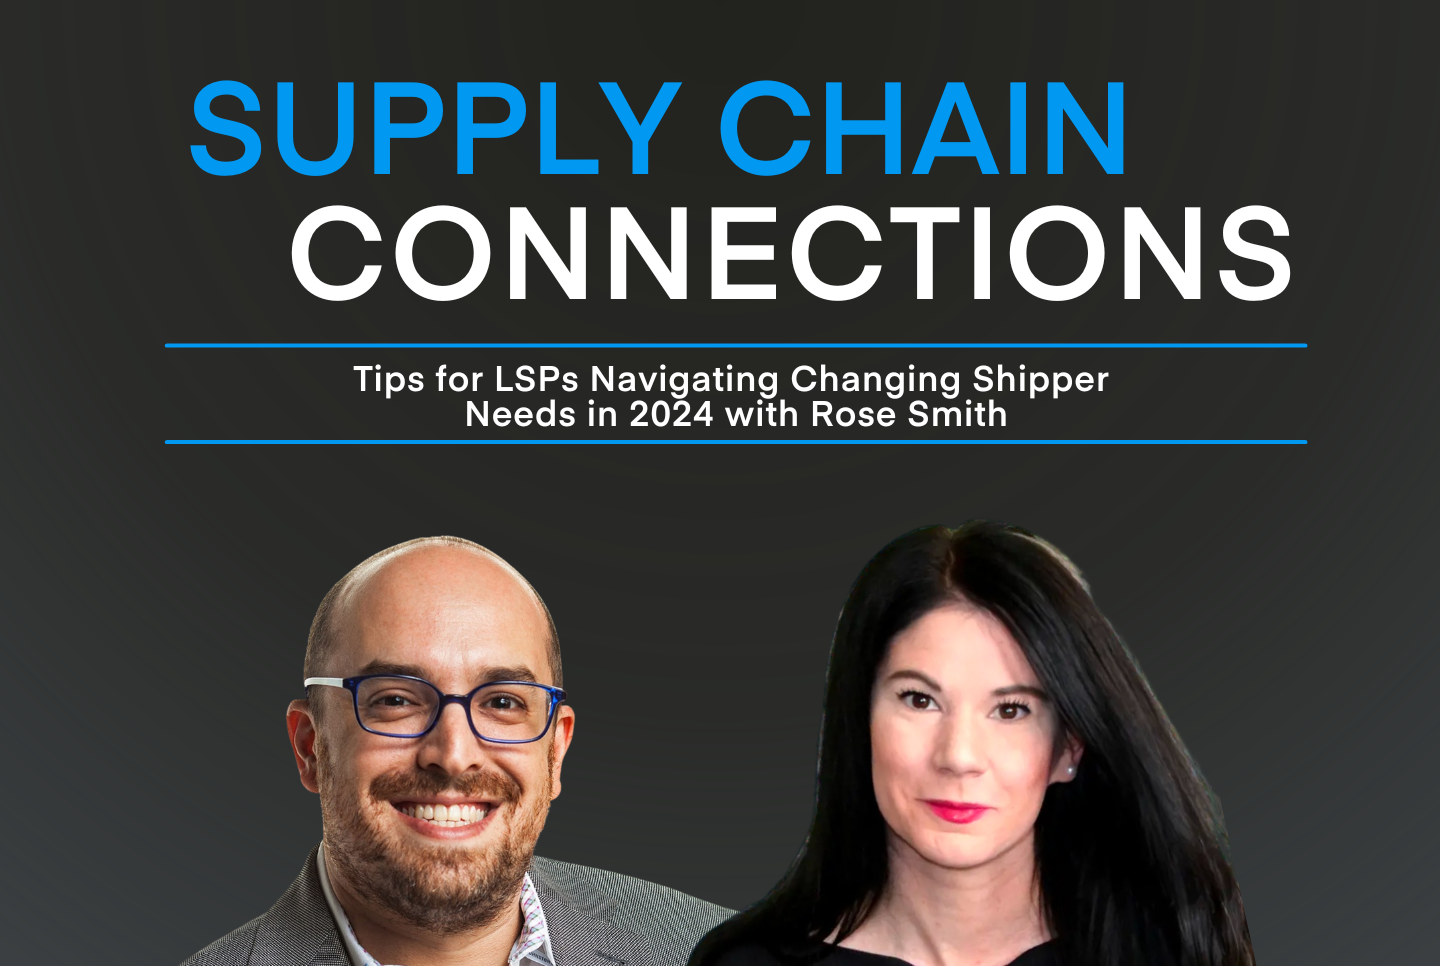 Navigating changing shipper needs in 2024